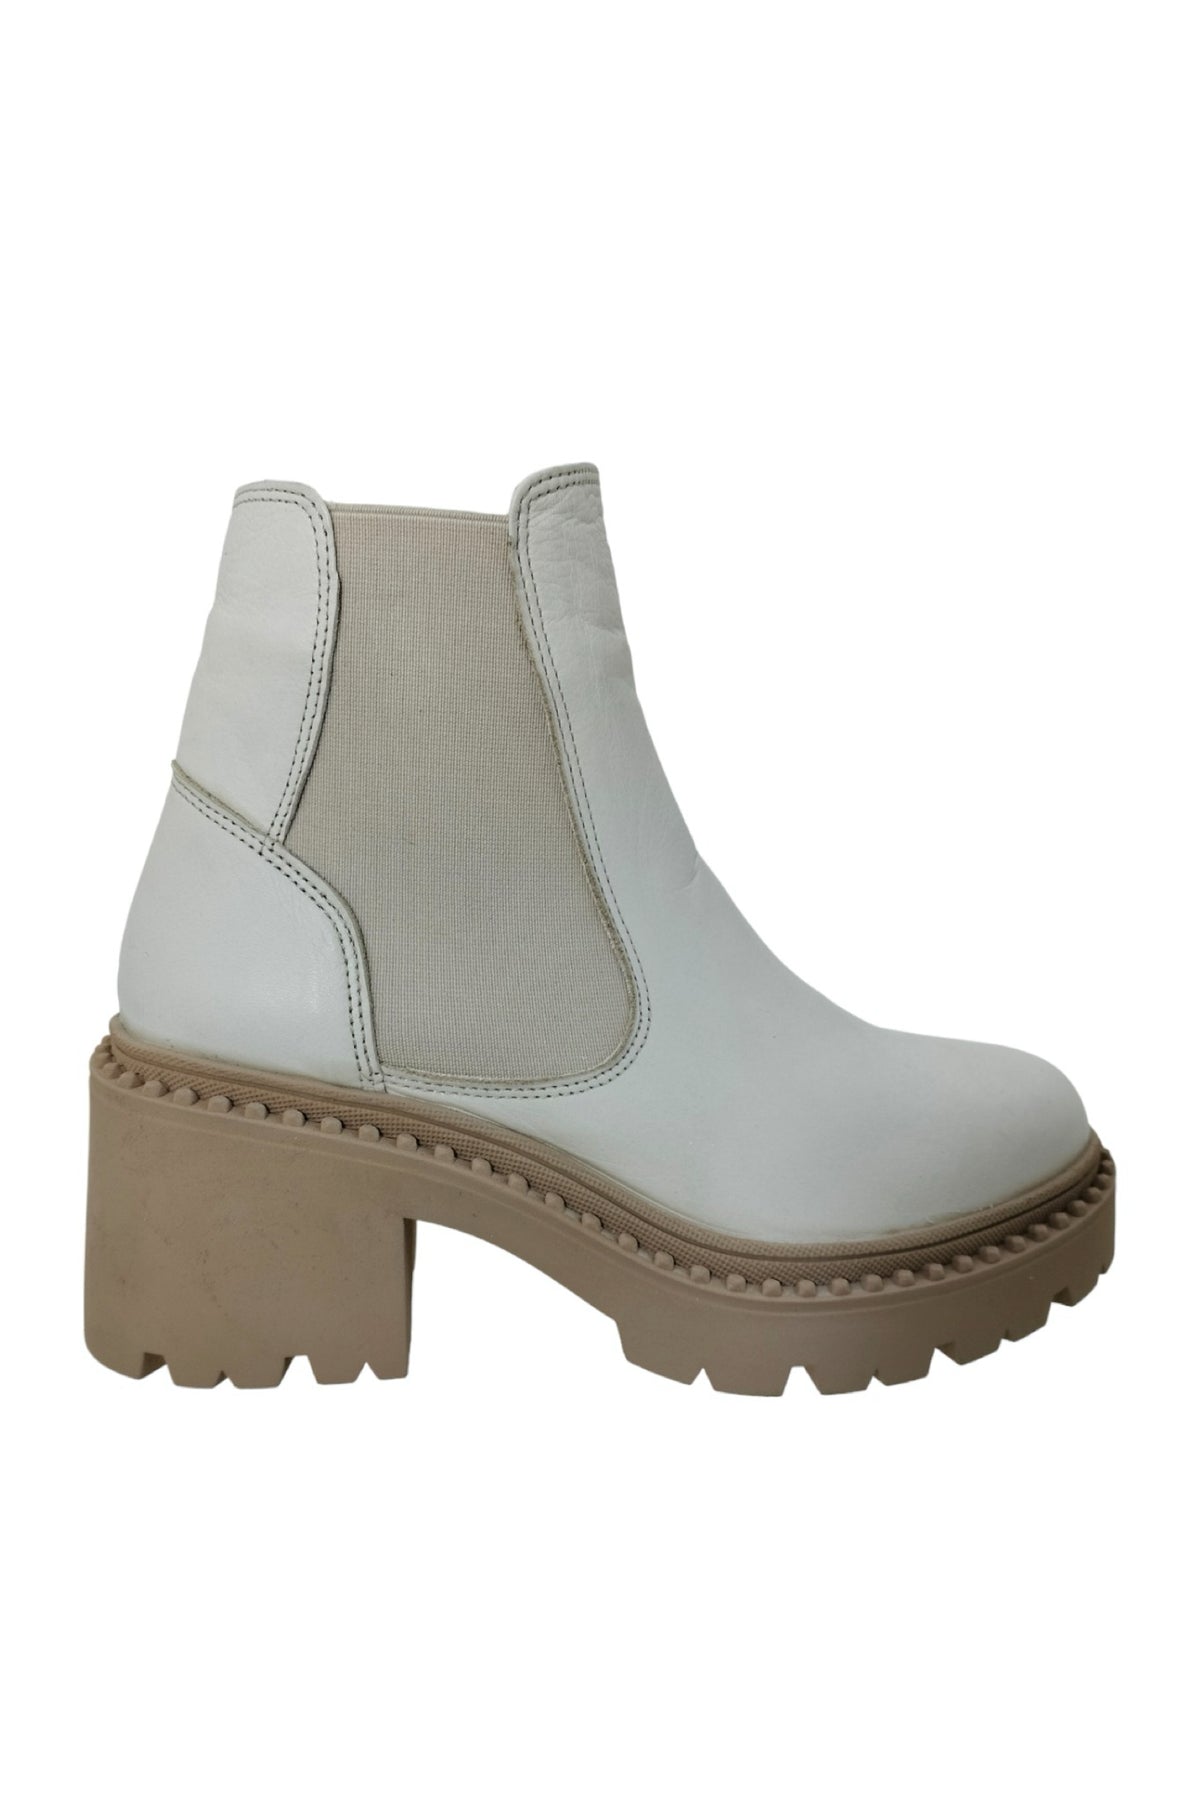 Milly Egret Cream Ankle Boot